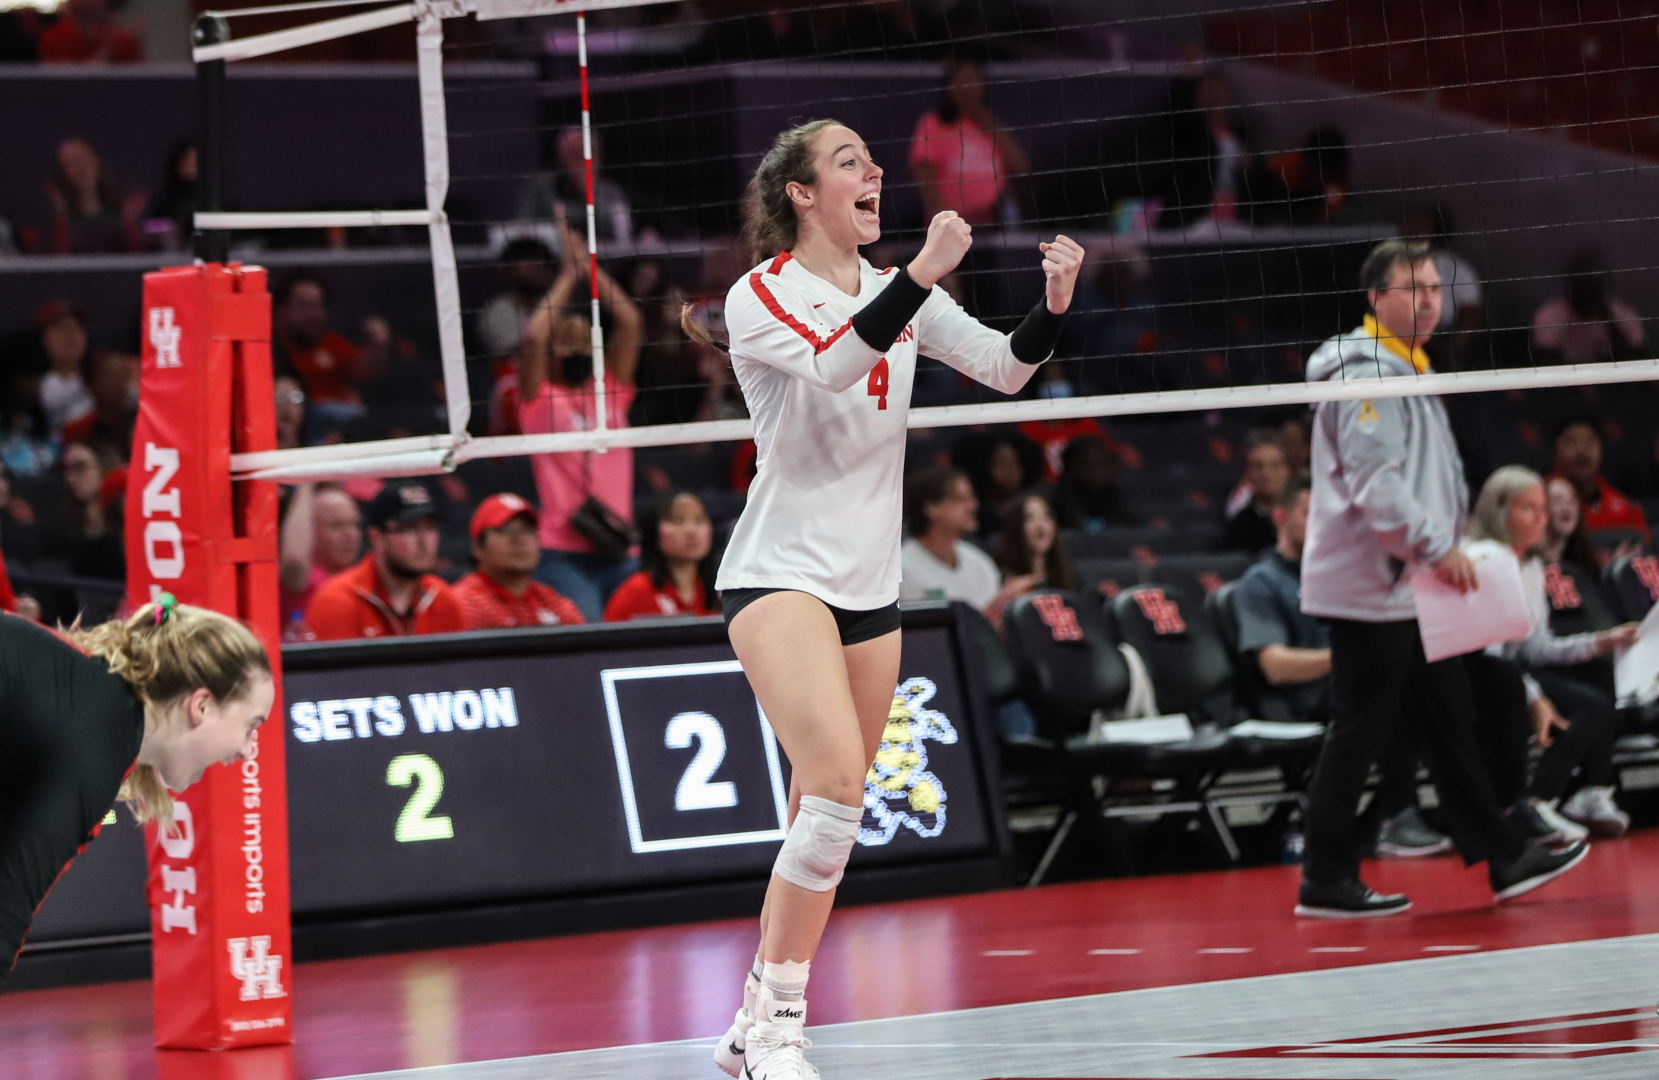 UH volleyball swept Tulsa on Friday night to remain undefeated in AAC play. | Sean Thomas/The Cougar